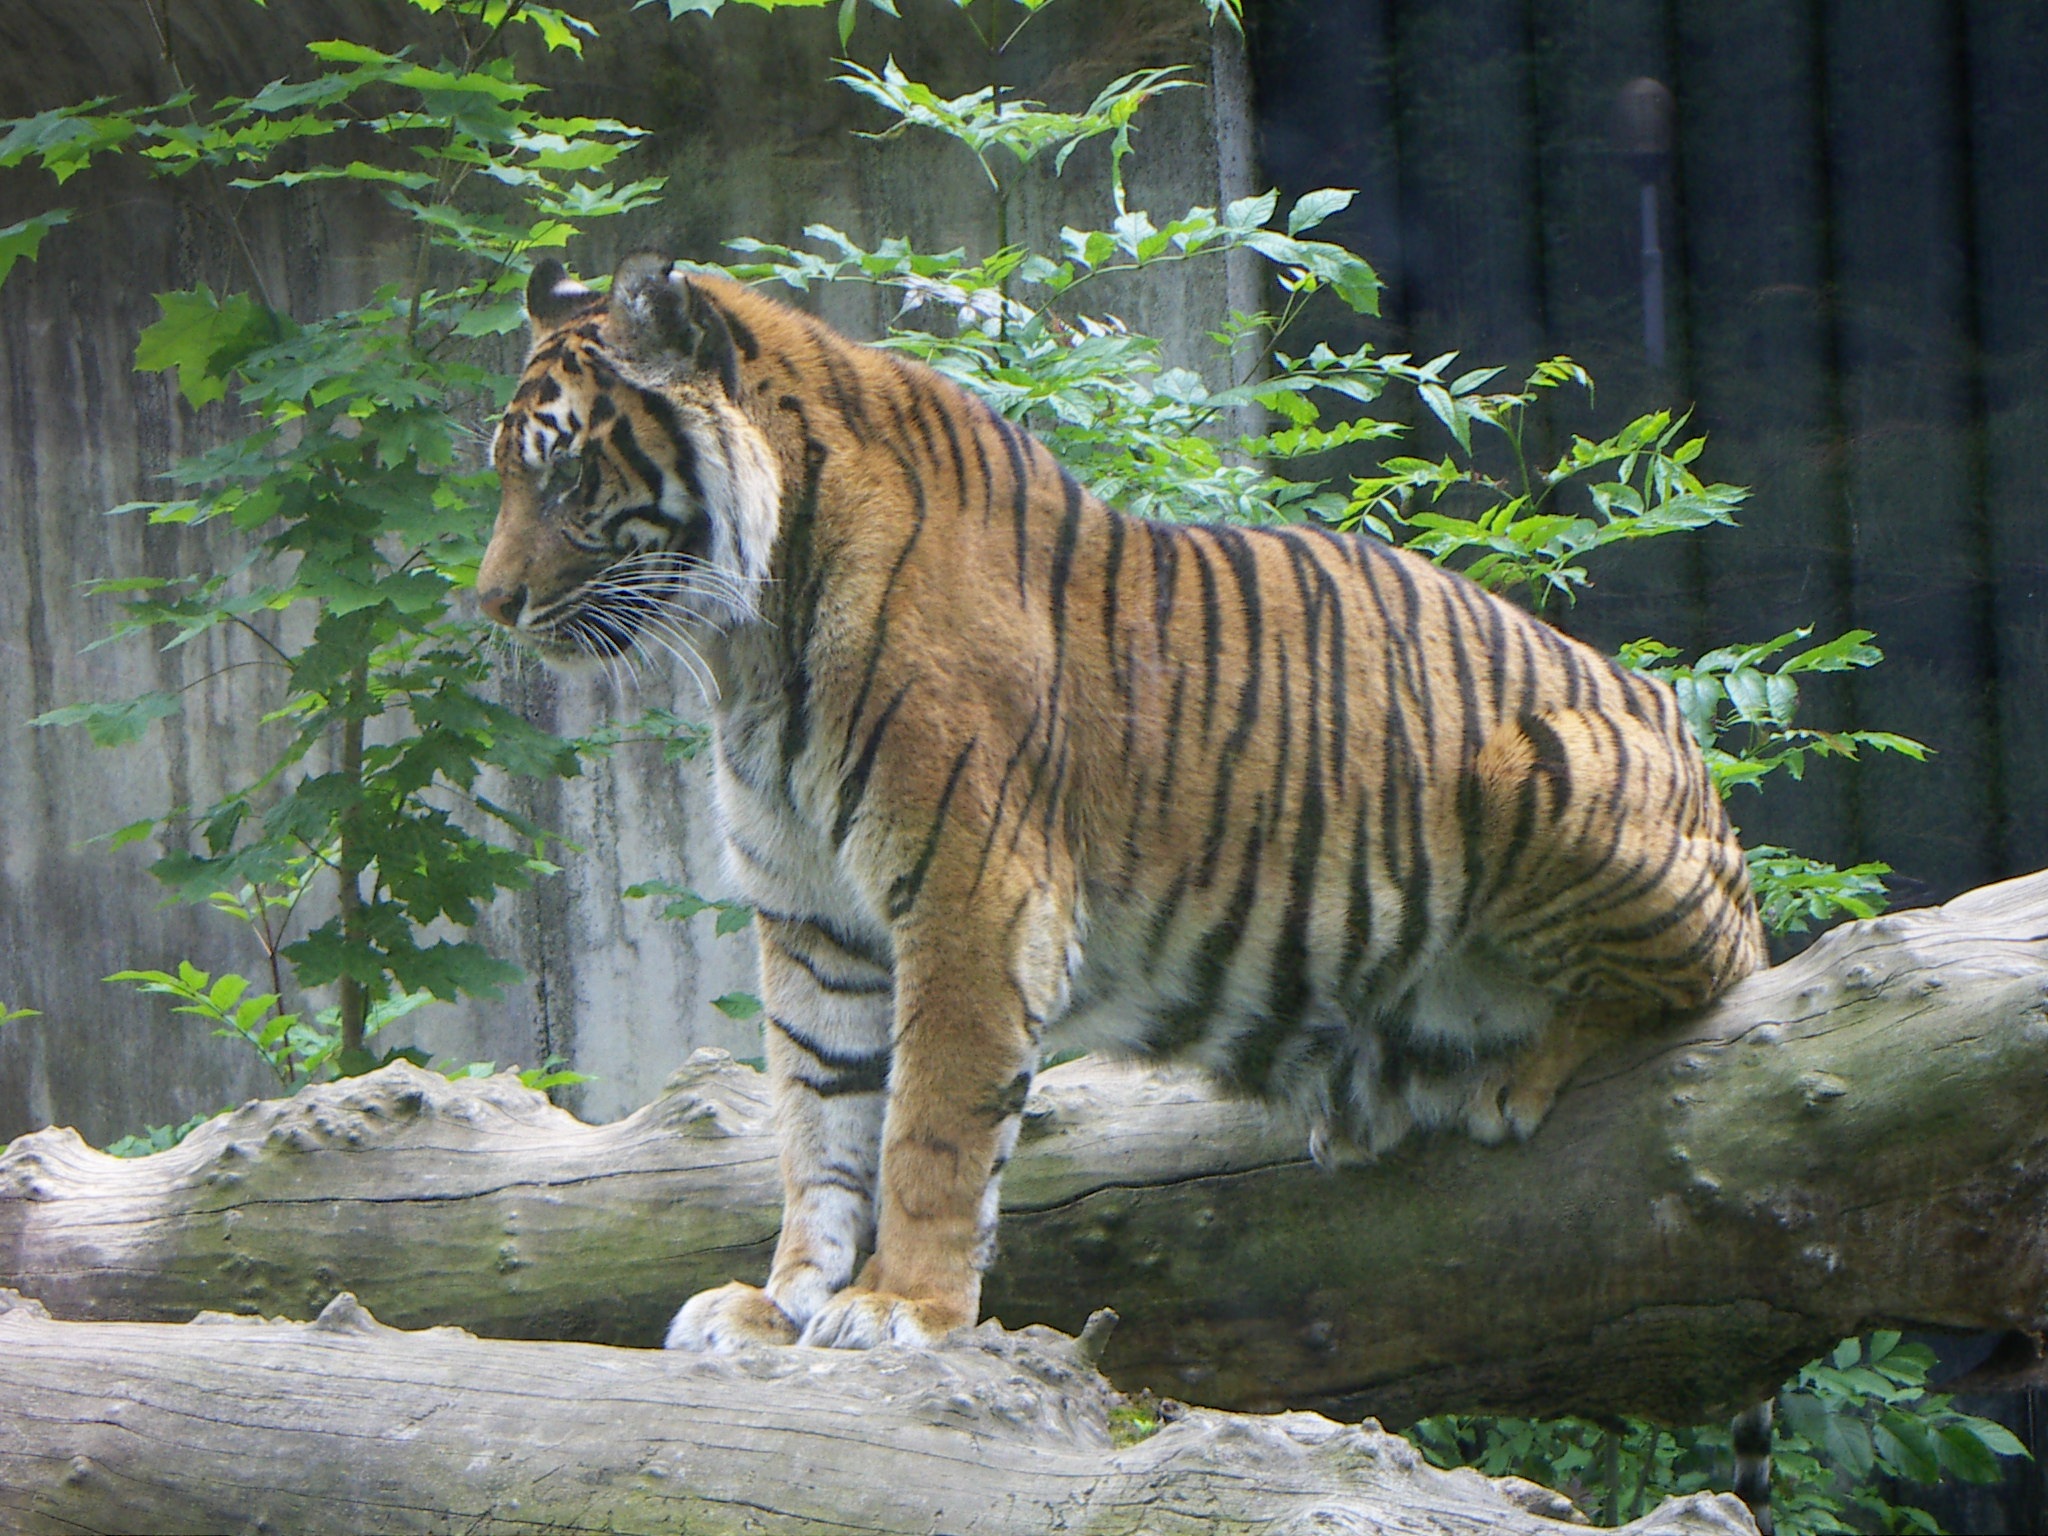 Tiger in the zoo photo